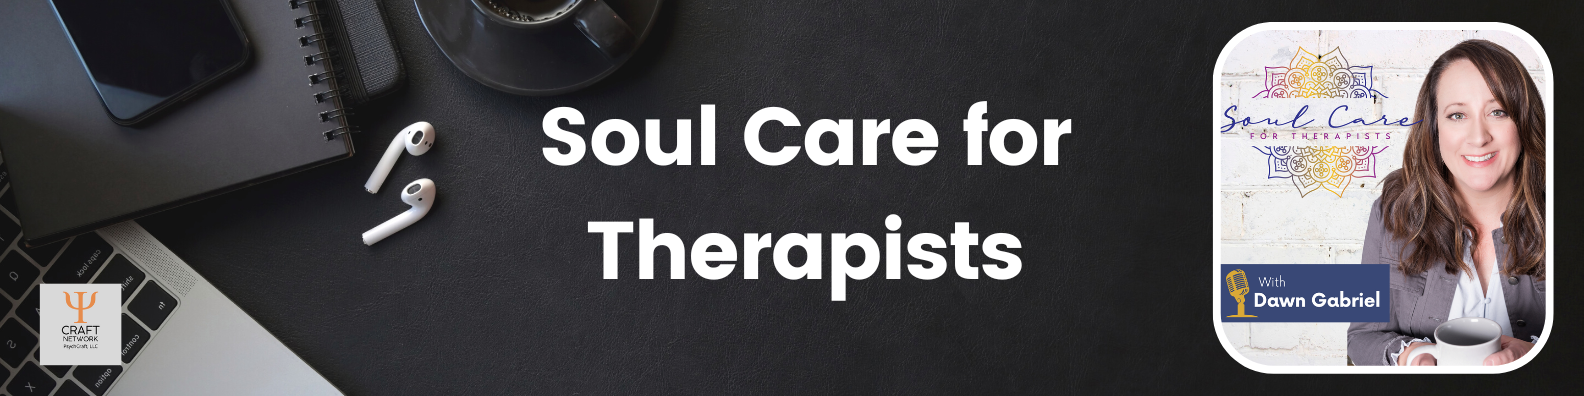 Soul Care for Therapists